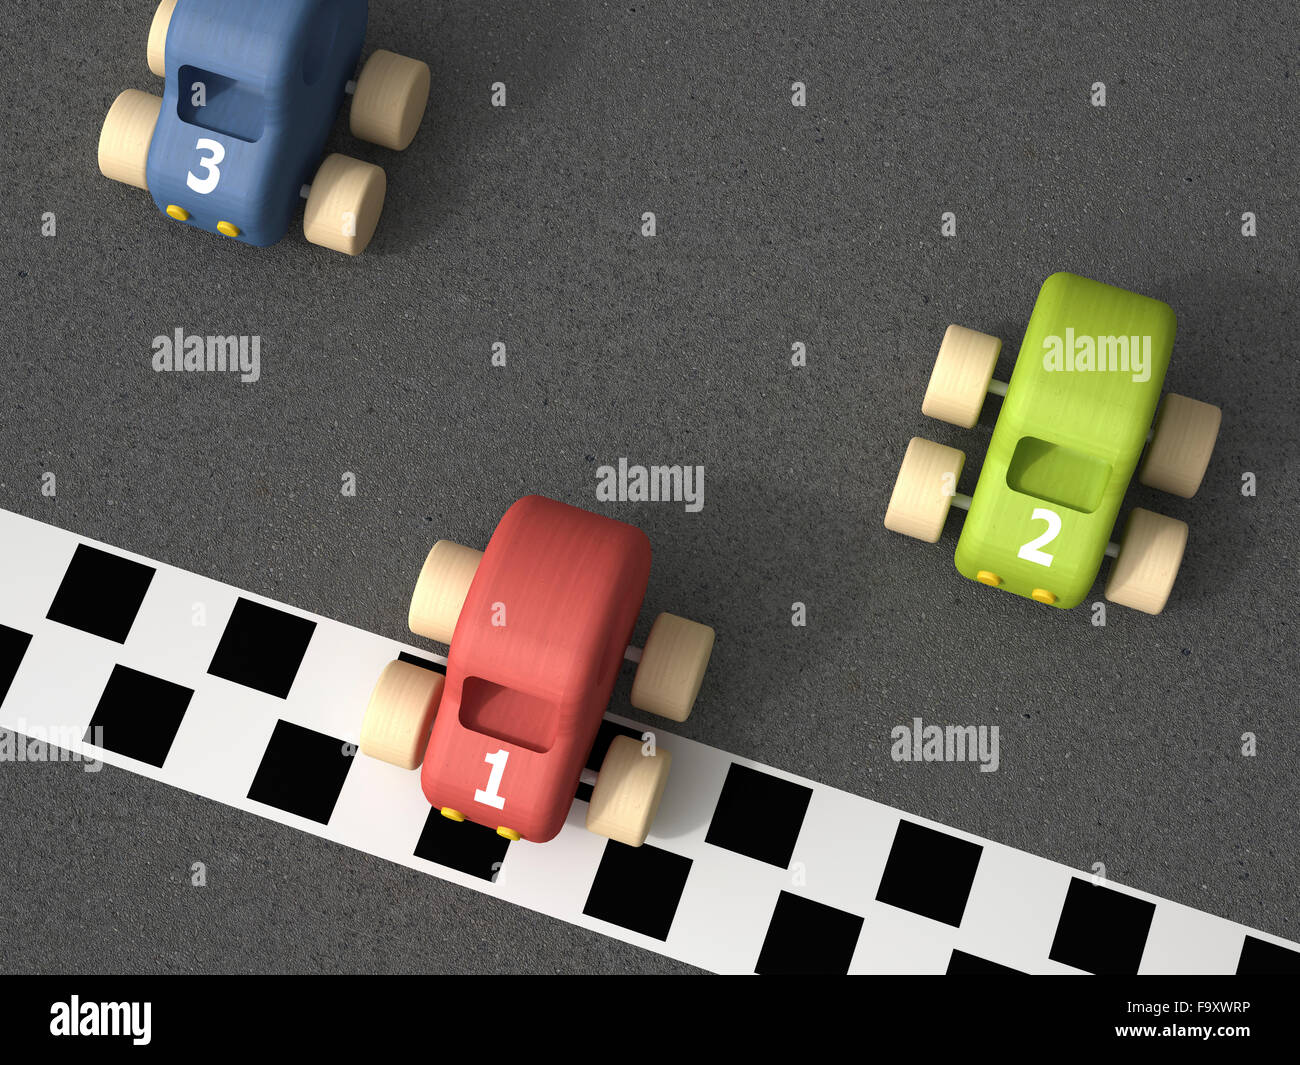 3d Rendering, toy racing cars at finishing line Stock Photo